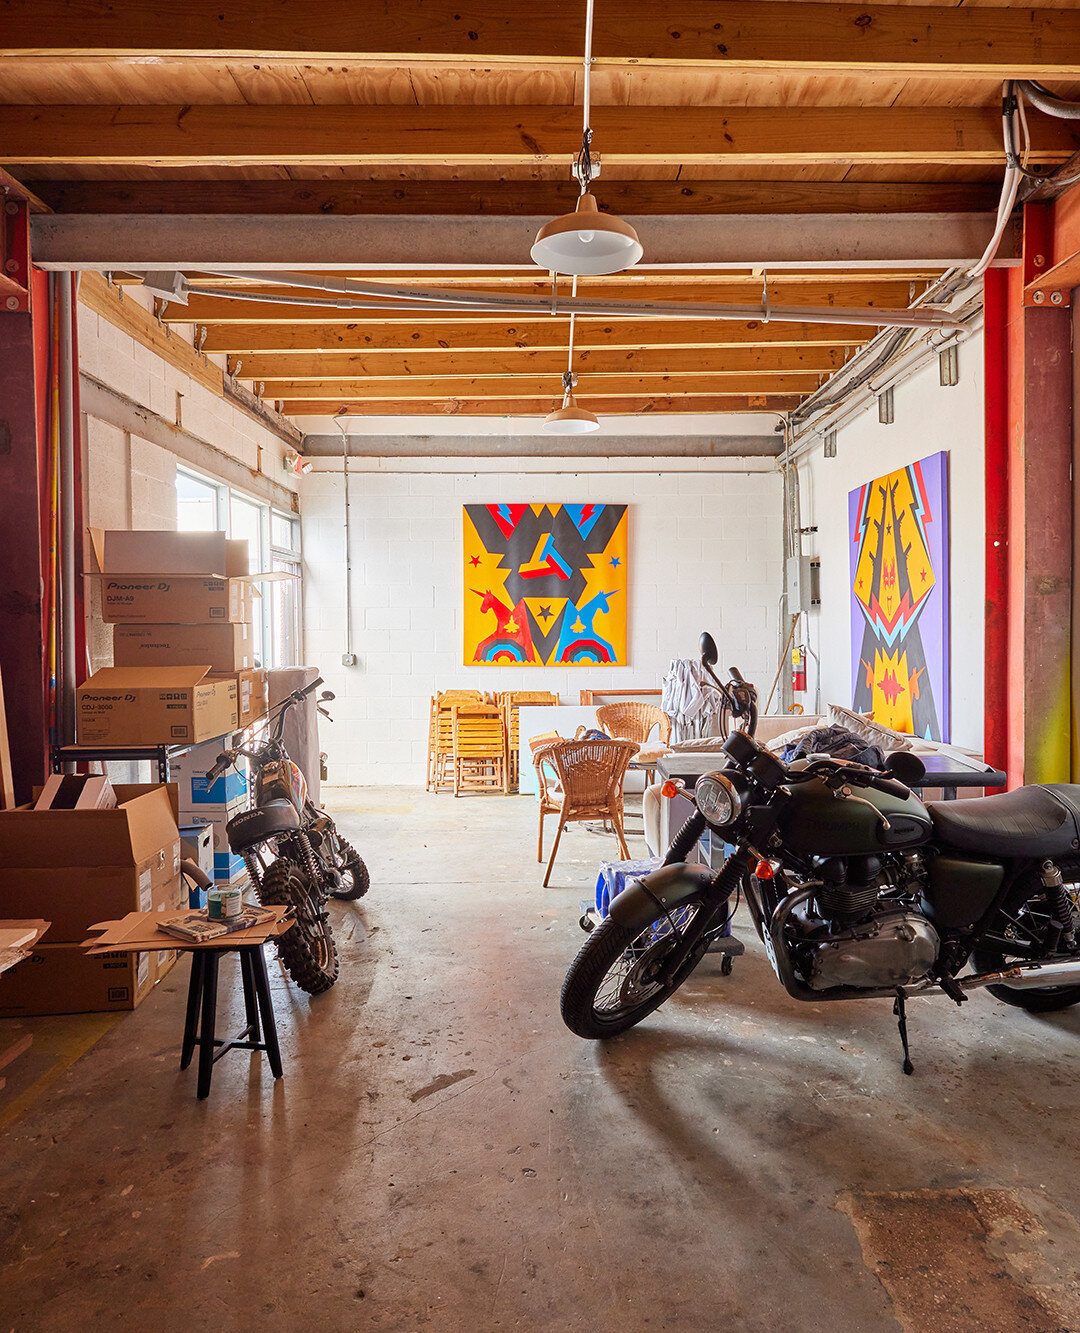 Are you looking for an income producing property? Are you a creative? Are you an investor?

If you answered yes to any of these questions, you MUST check out this incredible opportunity at the LITTLE RIVER CREATIVE BLDG

📍Located at 230 NW 71 STREET